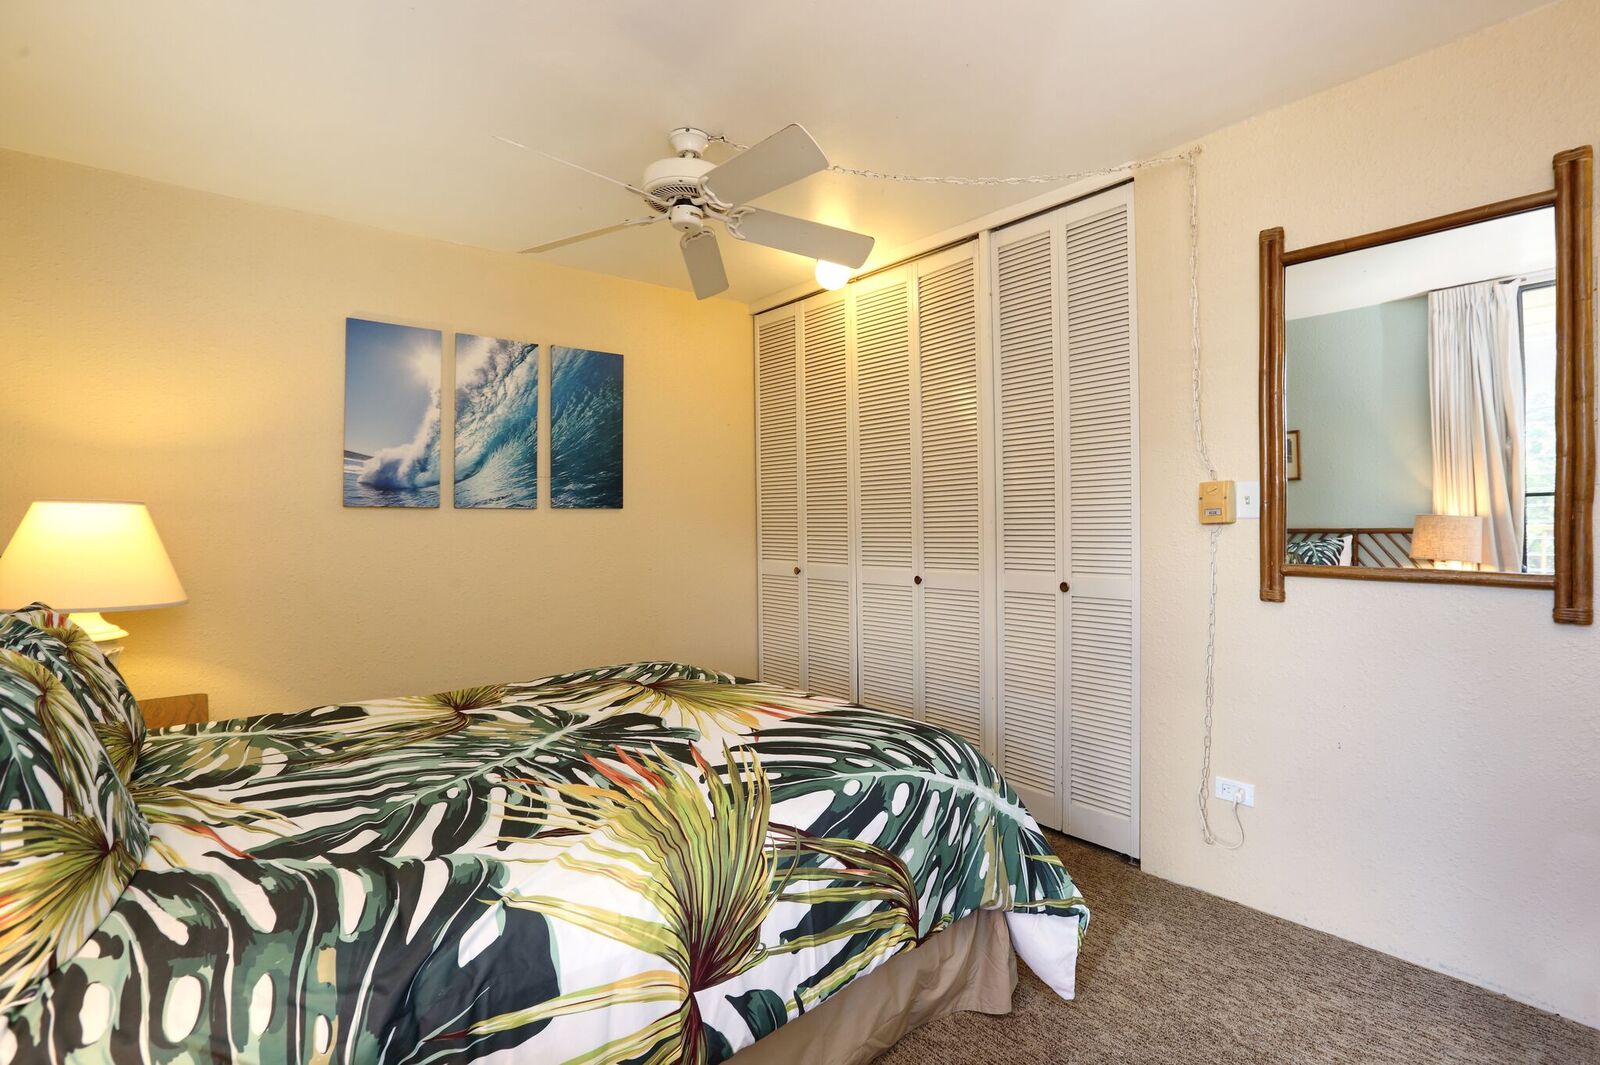 Lahaina Vacation Rentals, Paki Maui 313 - Wake up and walk directly to the beach, which is a minute away